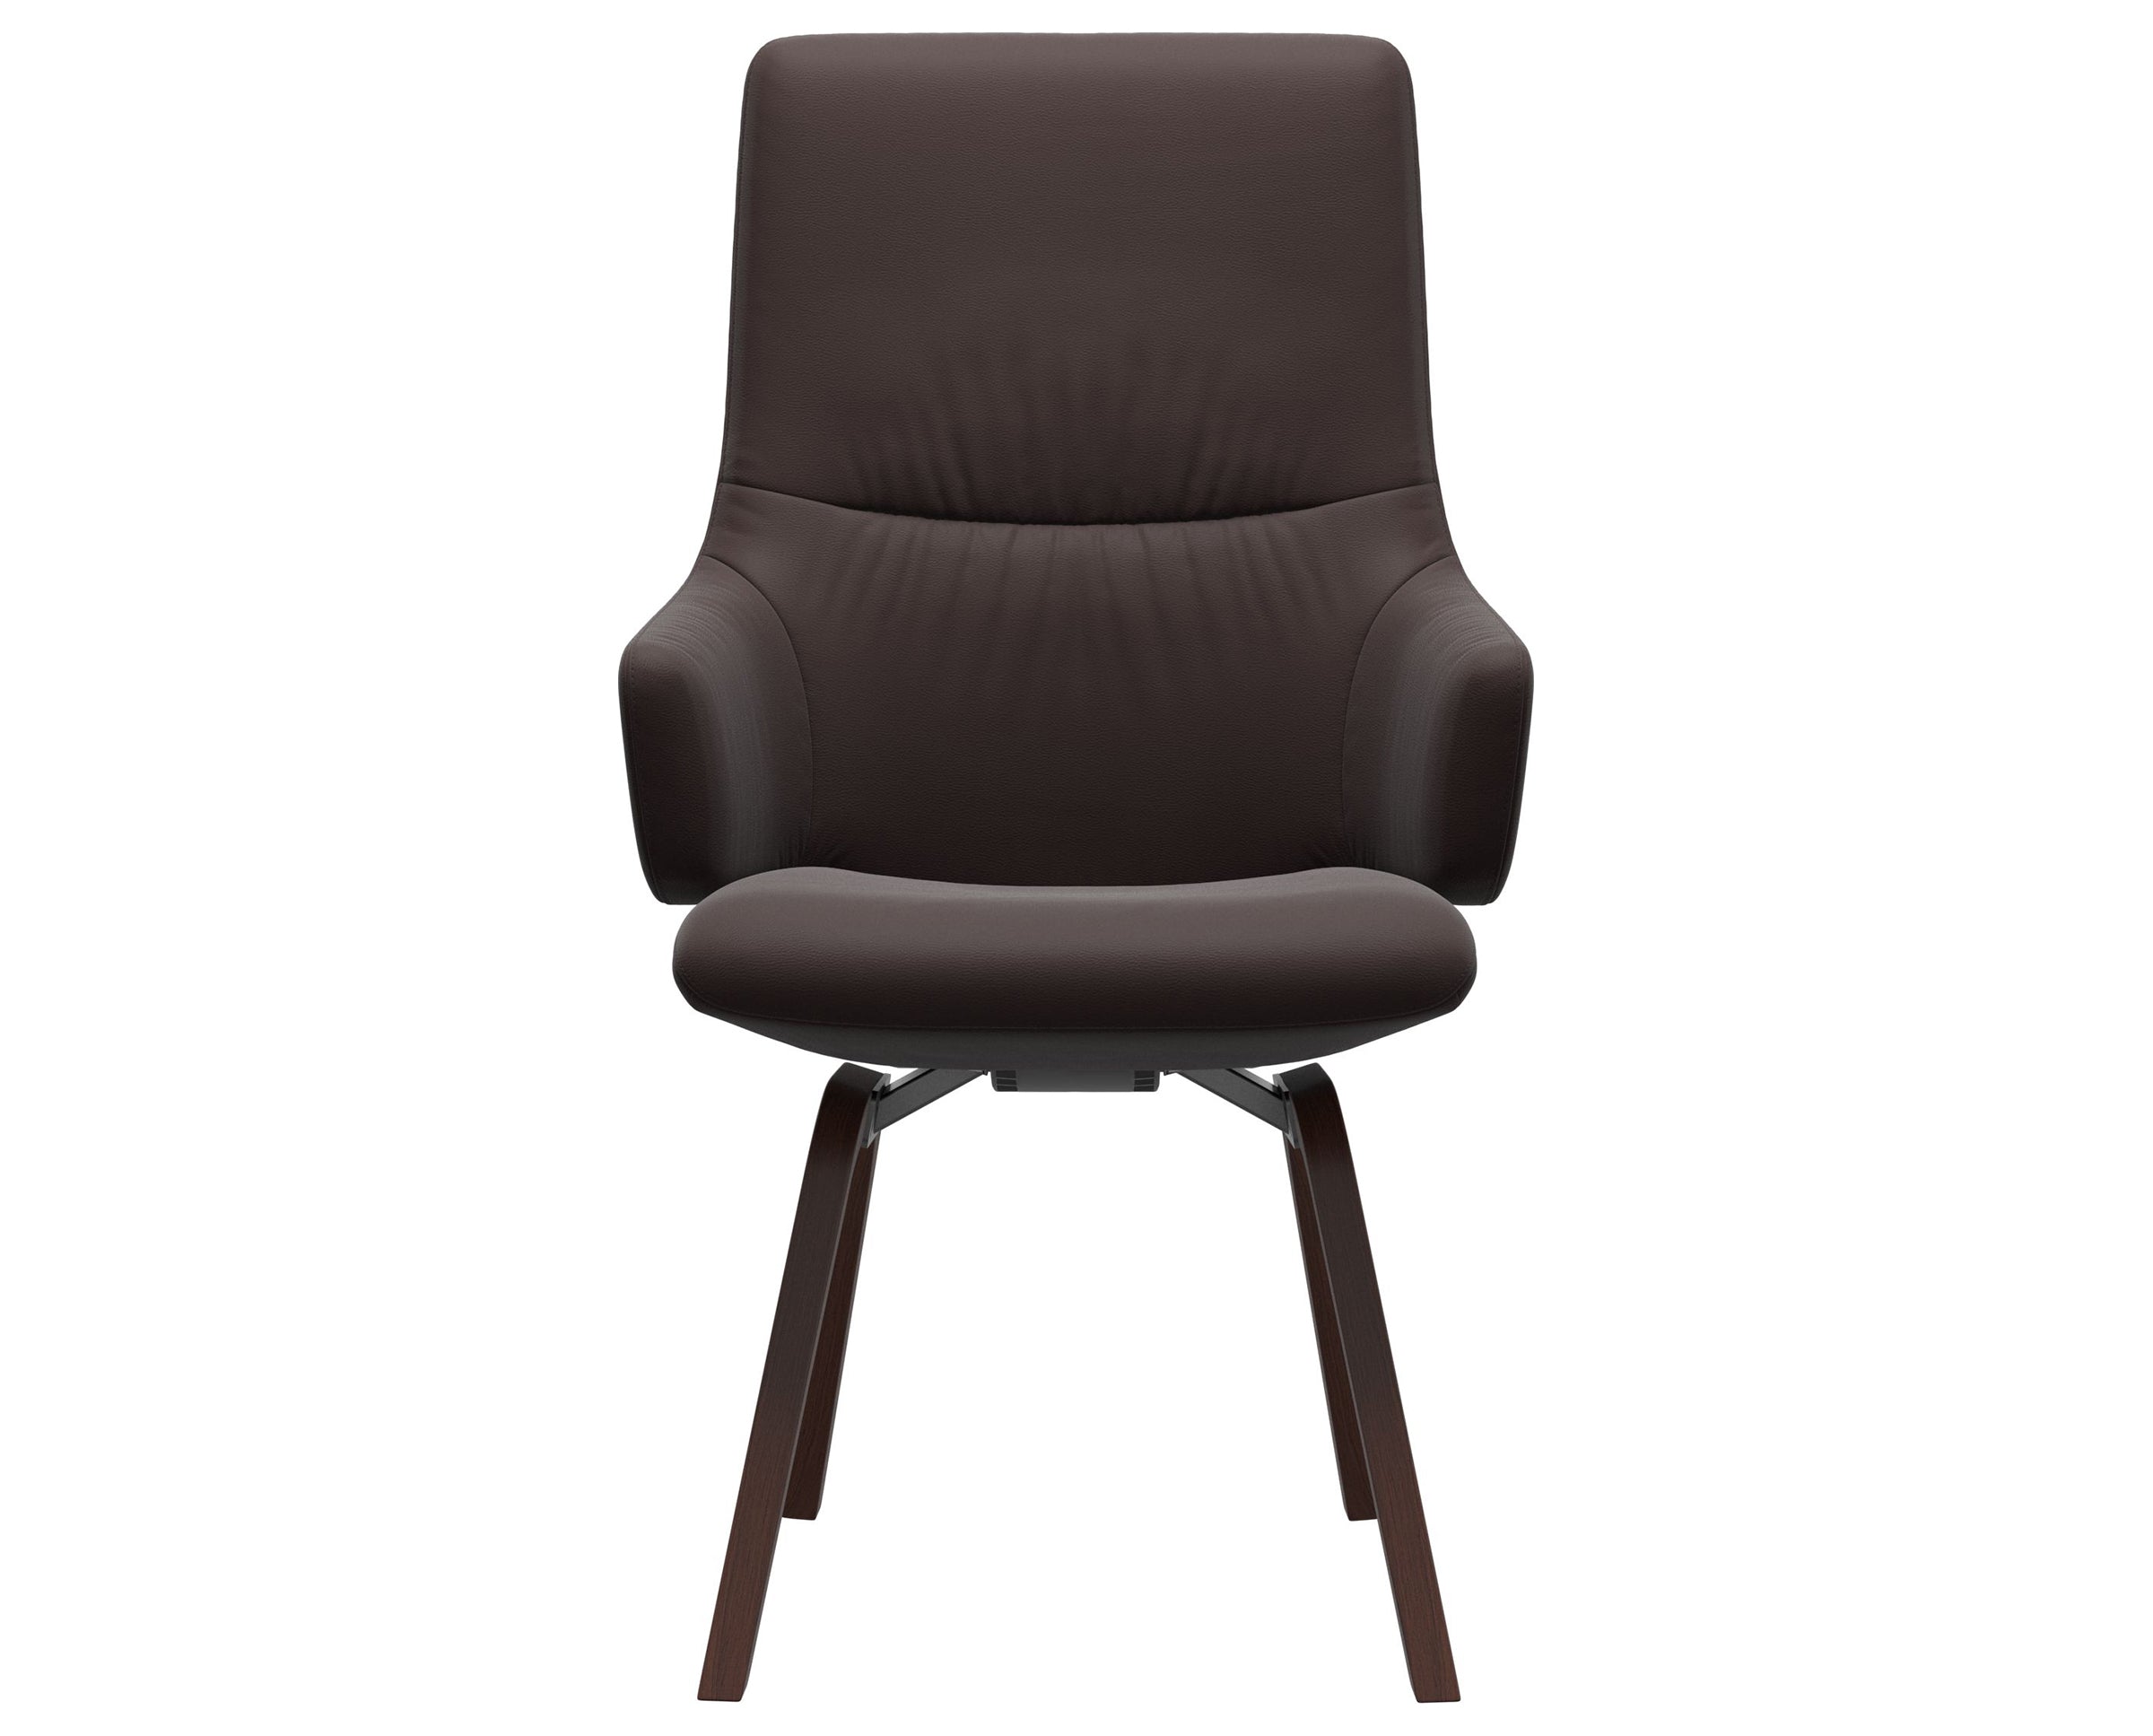 Paloma Leather Chocolate and Walnut Base | Stressless Mint High Back D200 Dining Chair w/Arms | Valley Ridge Furniture